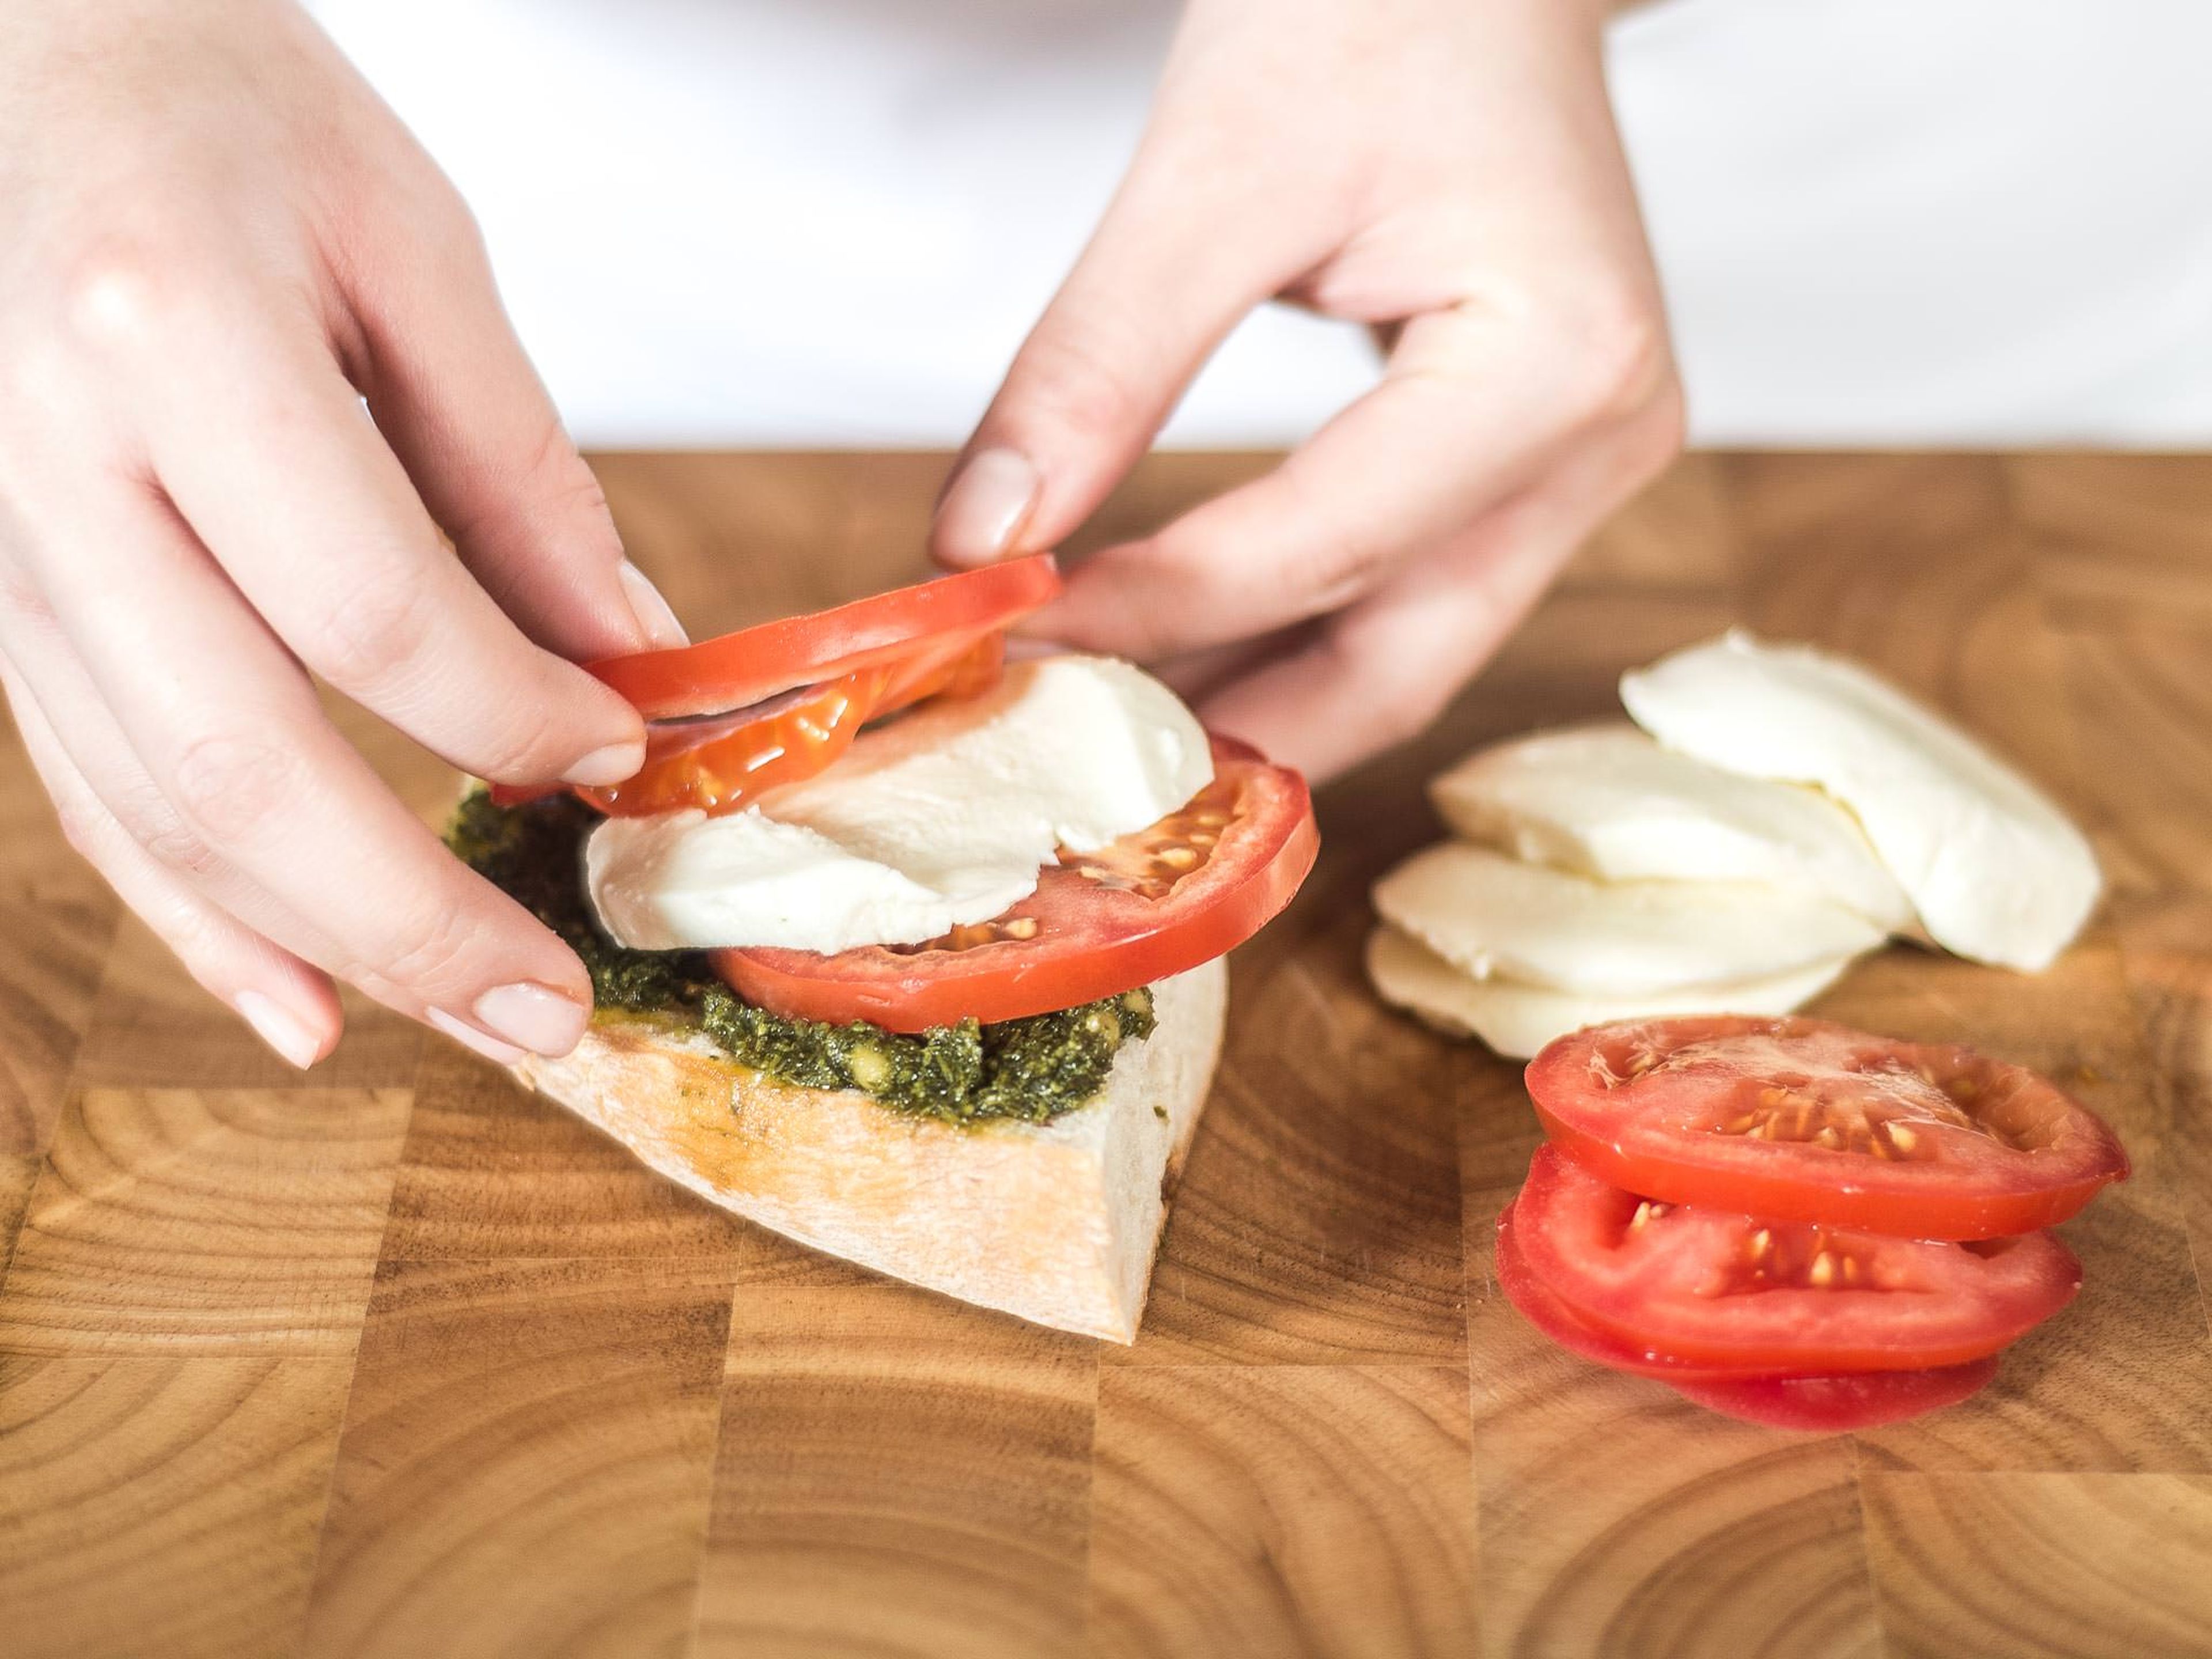 Next, spread the pesto onto the bread and place alternating layers of tomato and mozzarella slices on top.